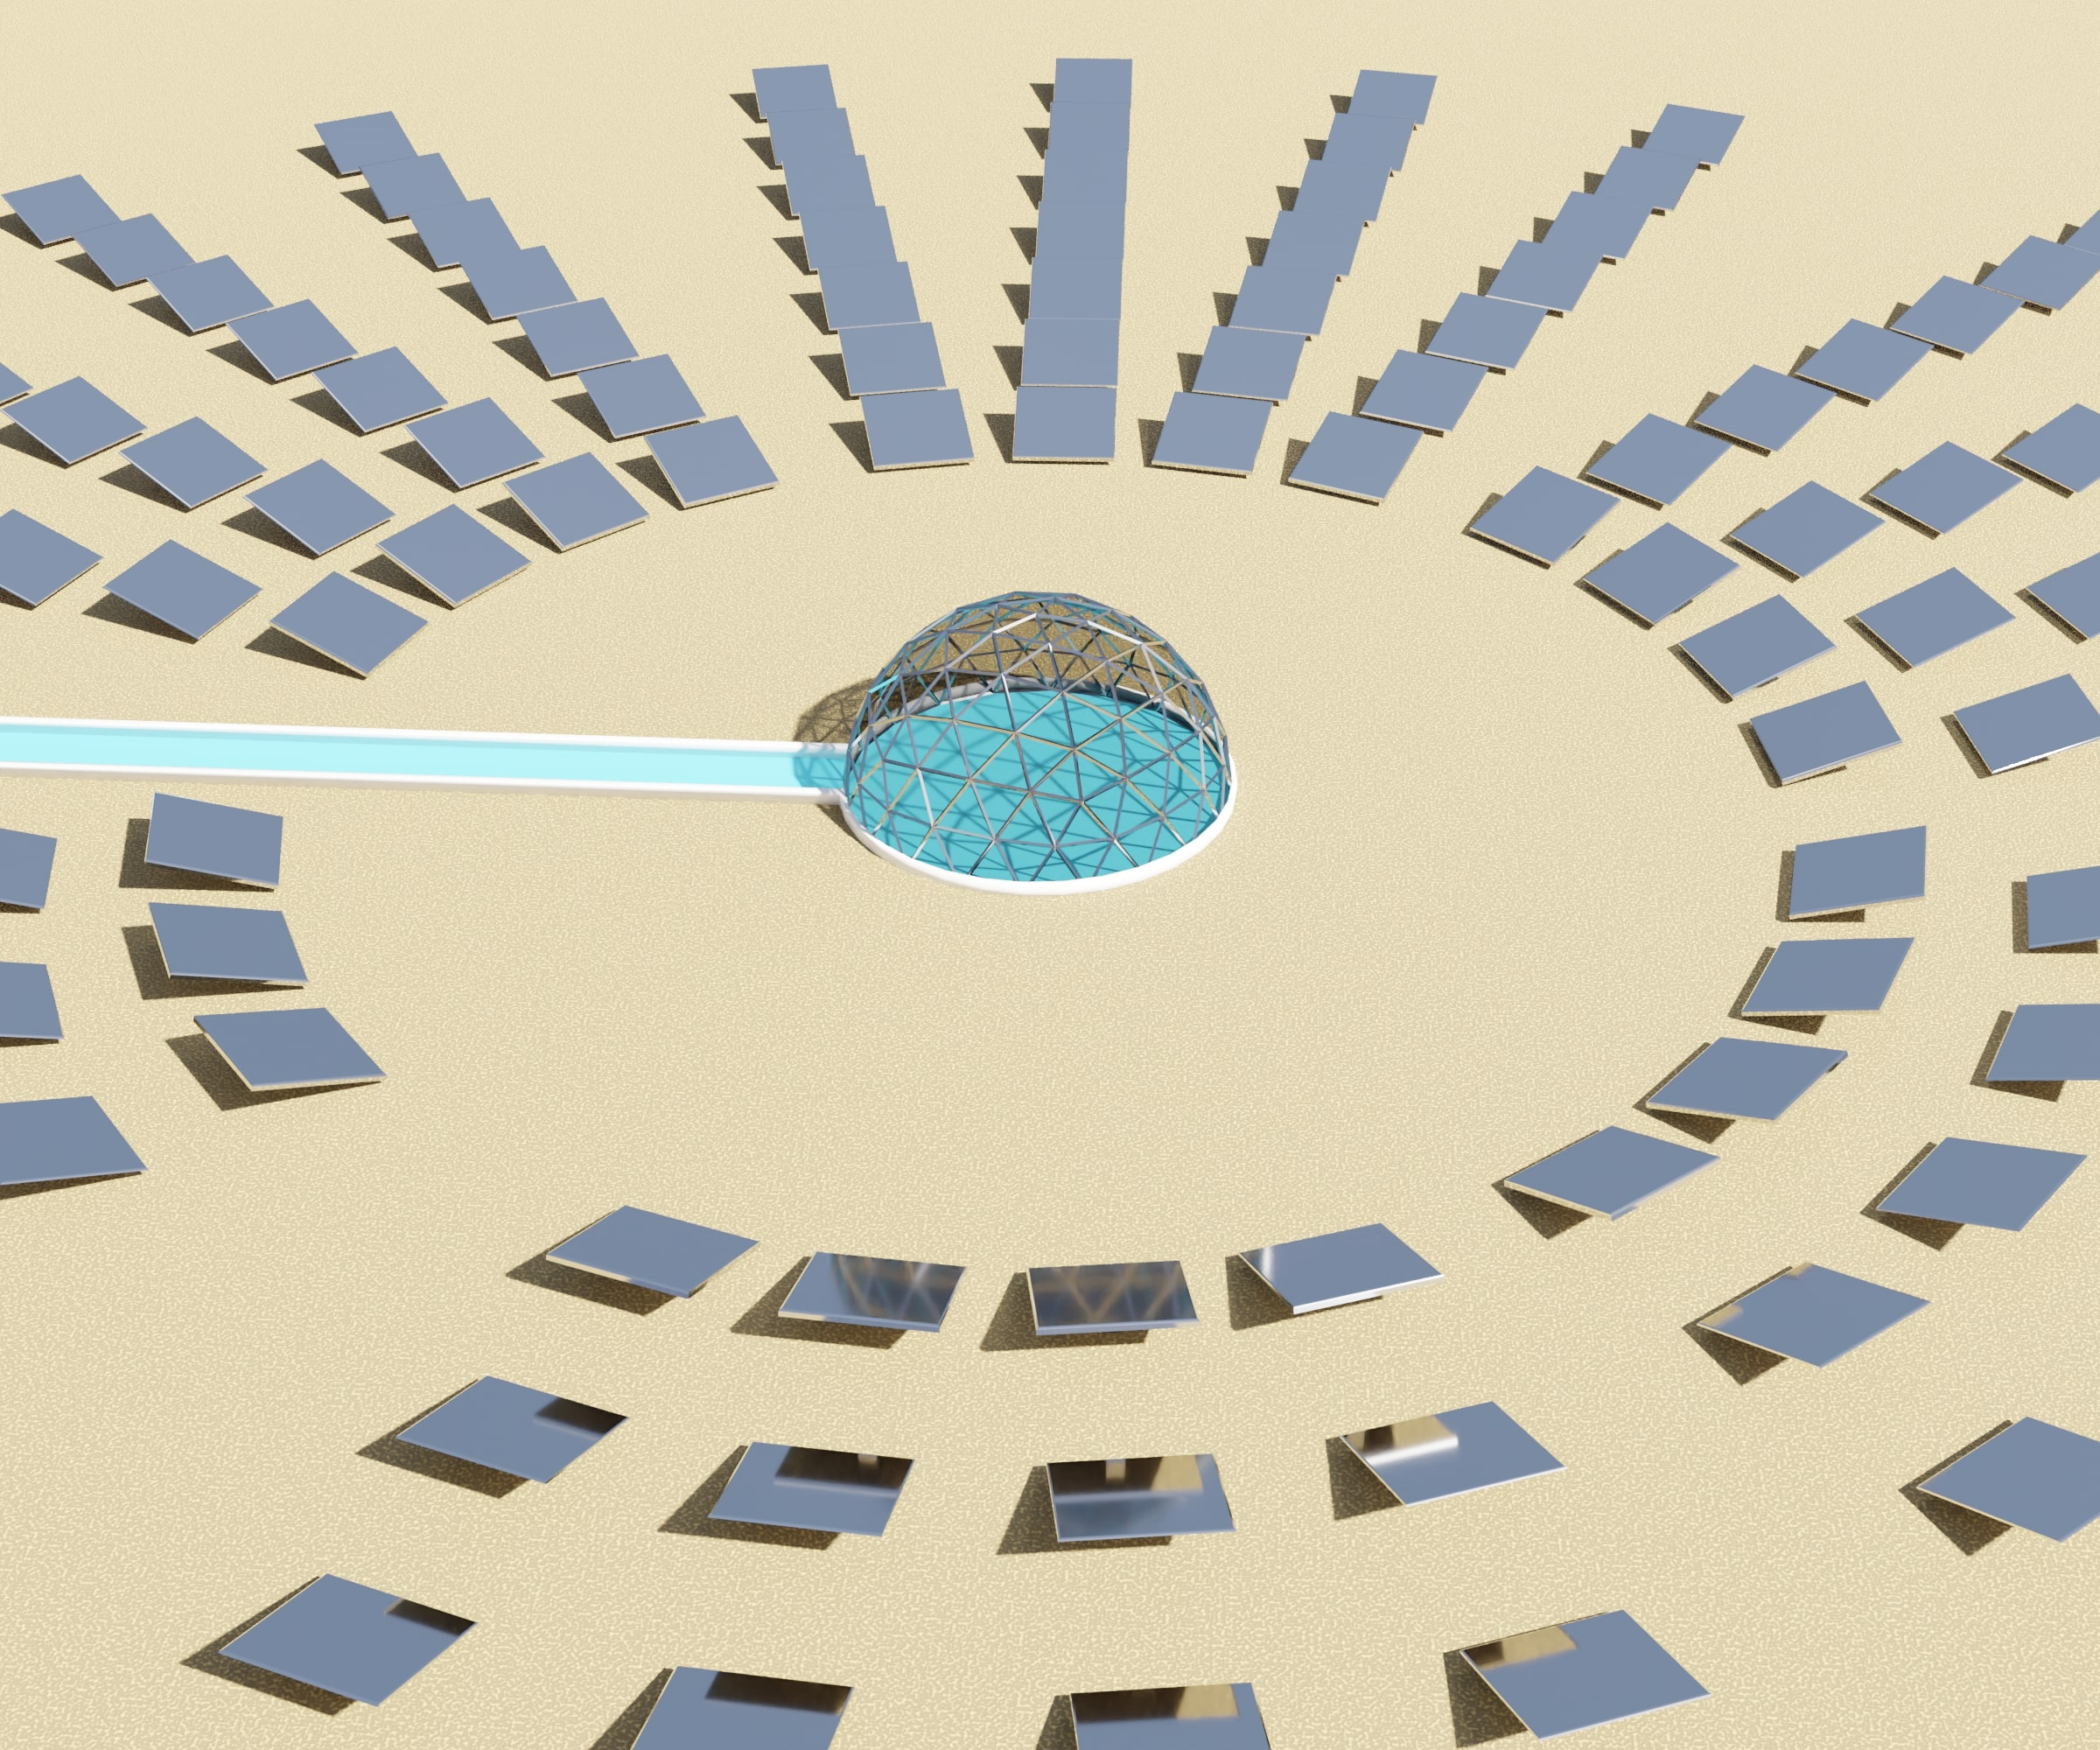 solar dome desalination is a future of carbon-neutral seawater desalination in the desert 3d rendering